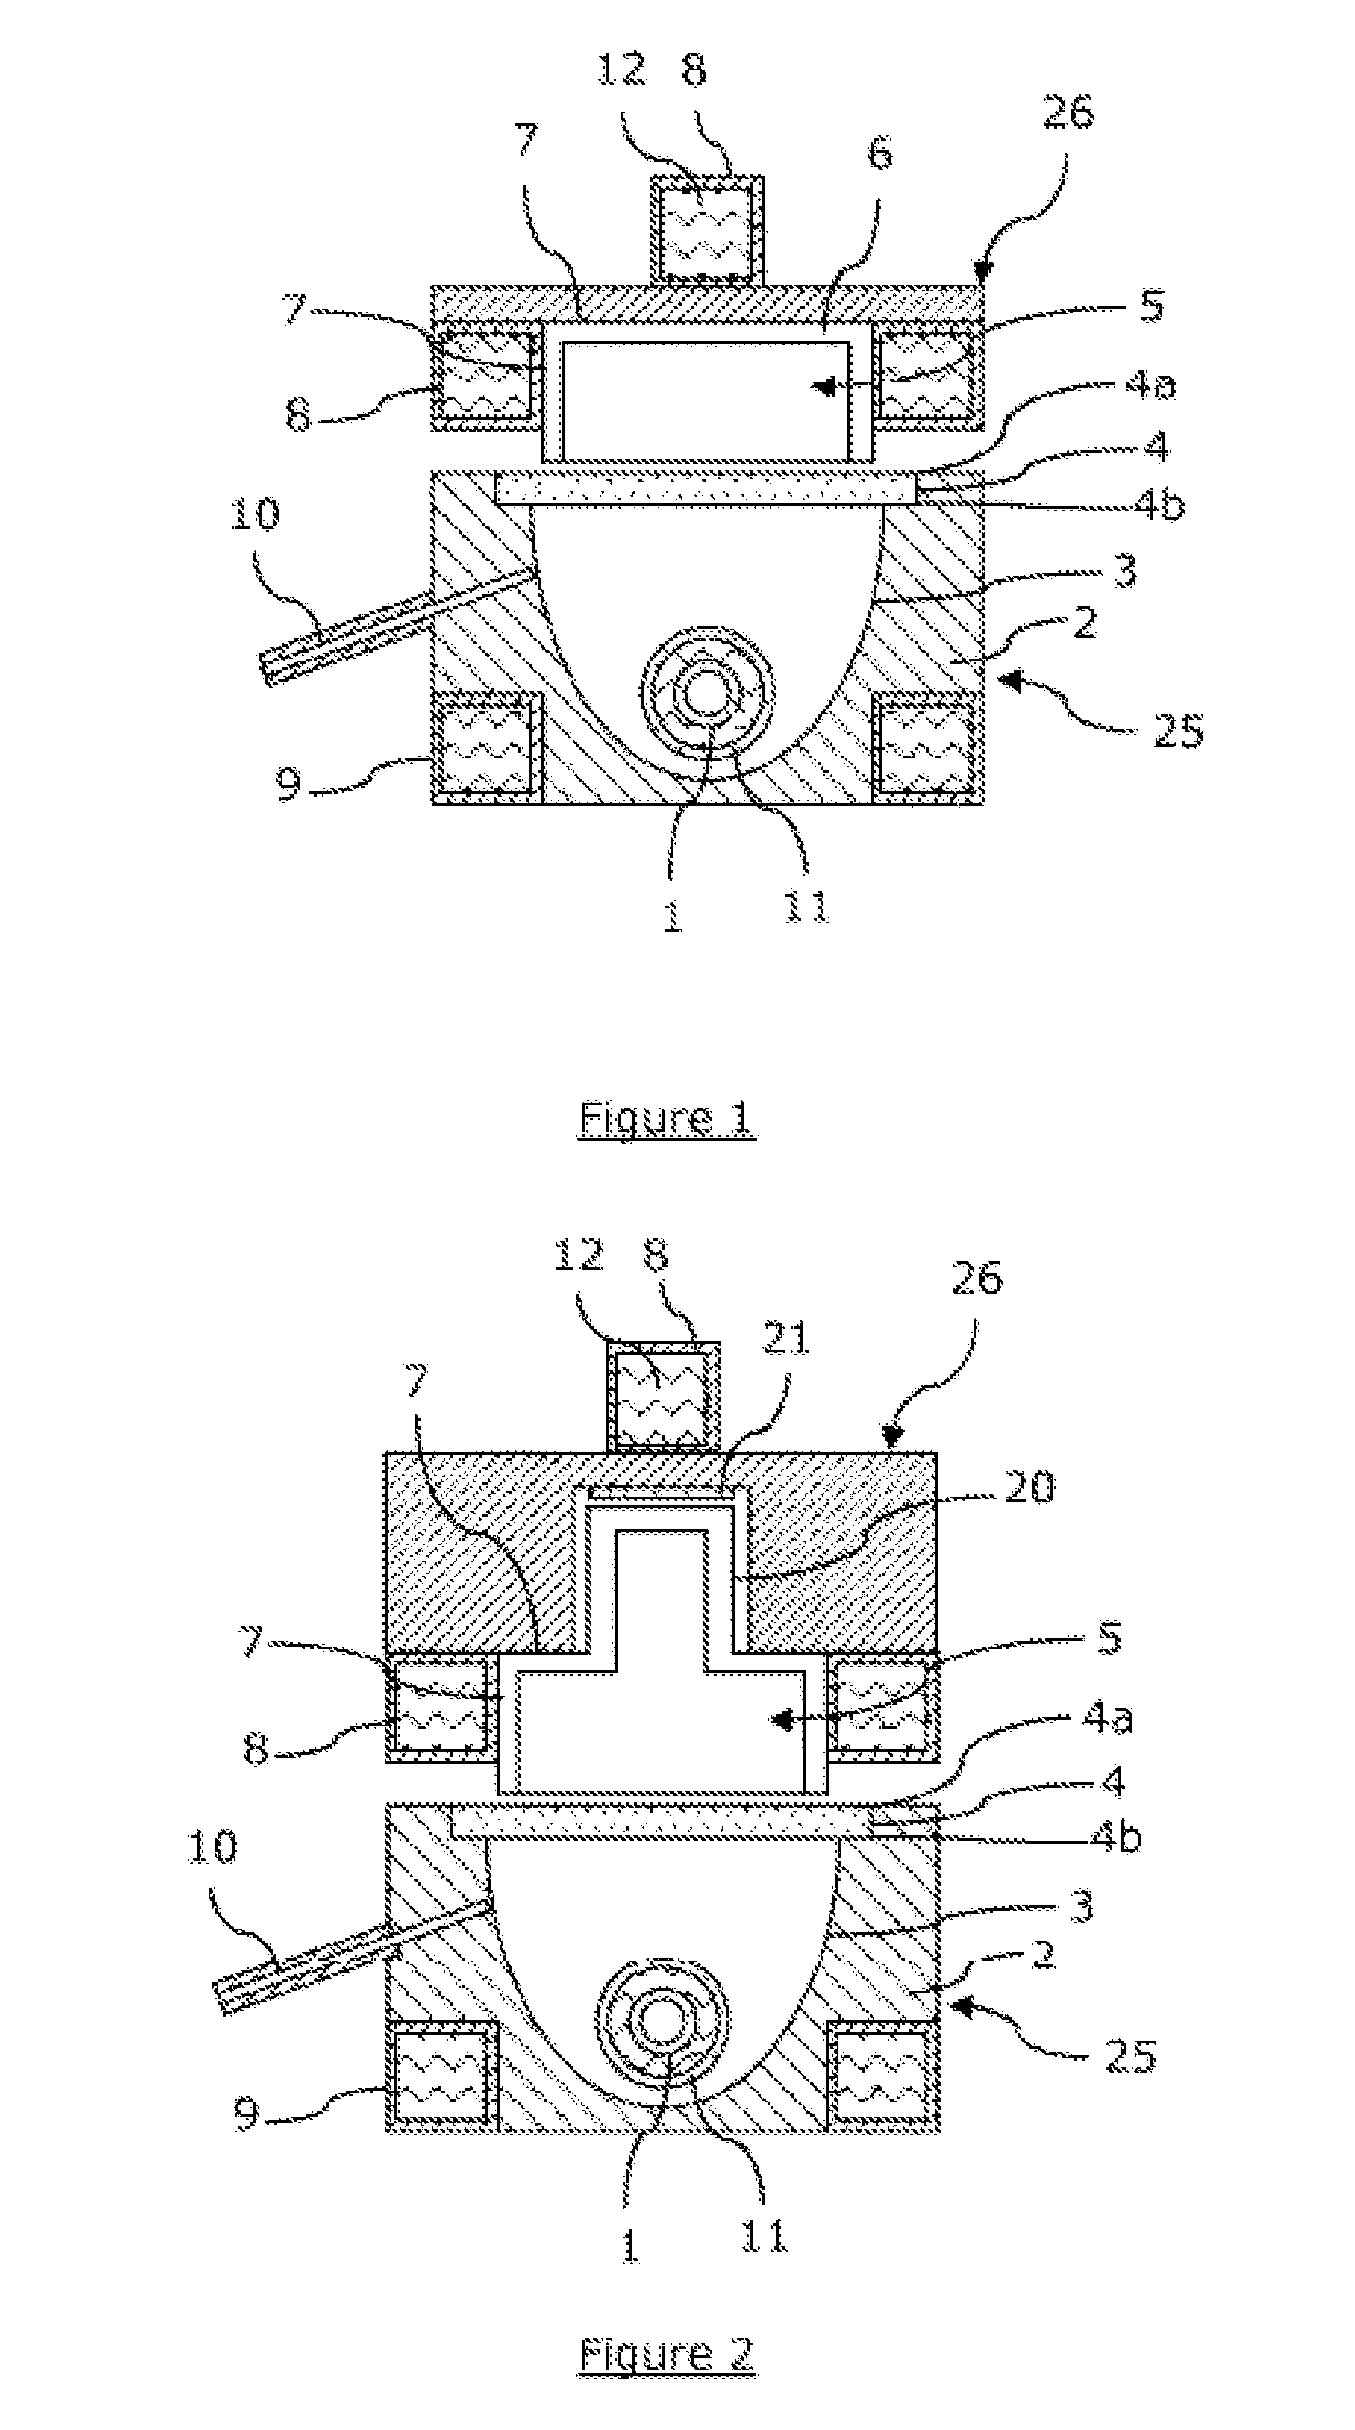 Cooled pulsed light treatment device